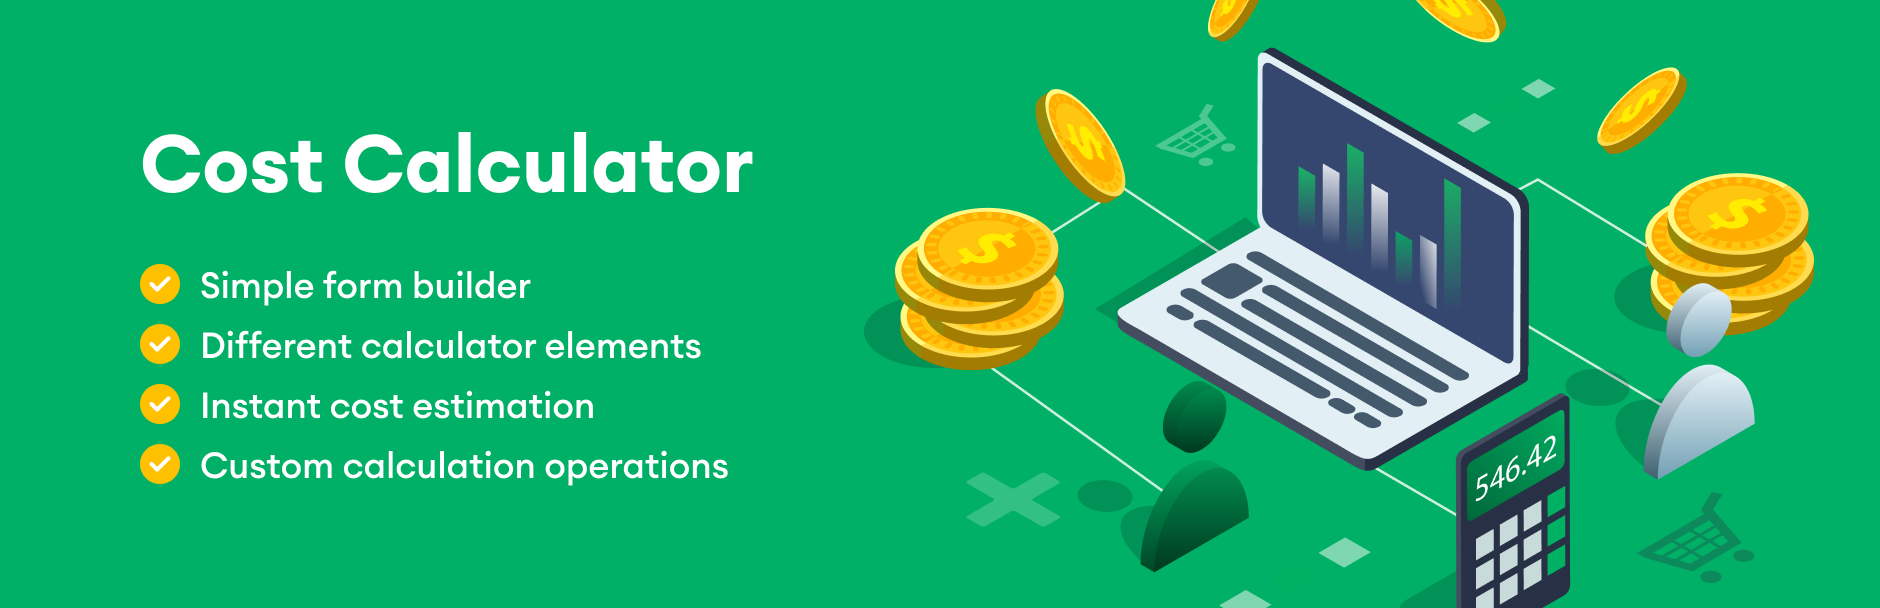 Cost Calculator Builder PRO - Cost Calculator Builder PRO v3.1.65 by Stylemixthemes Nulled Free Download